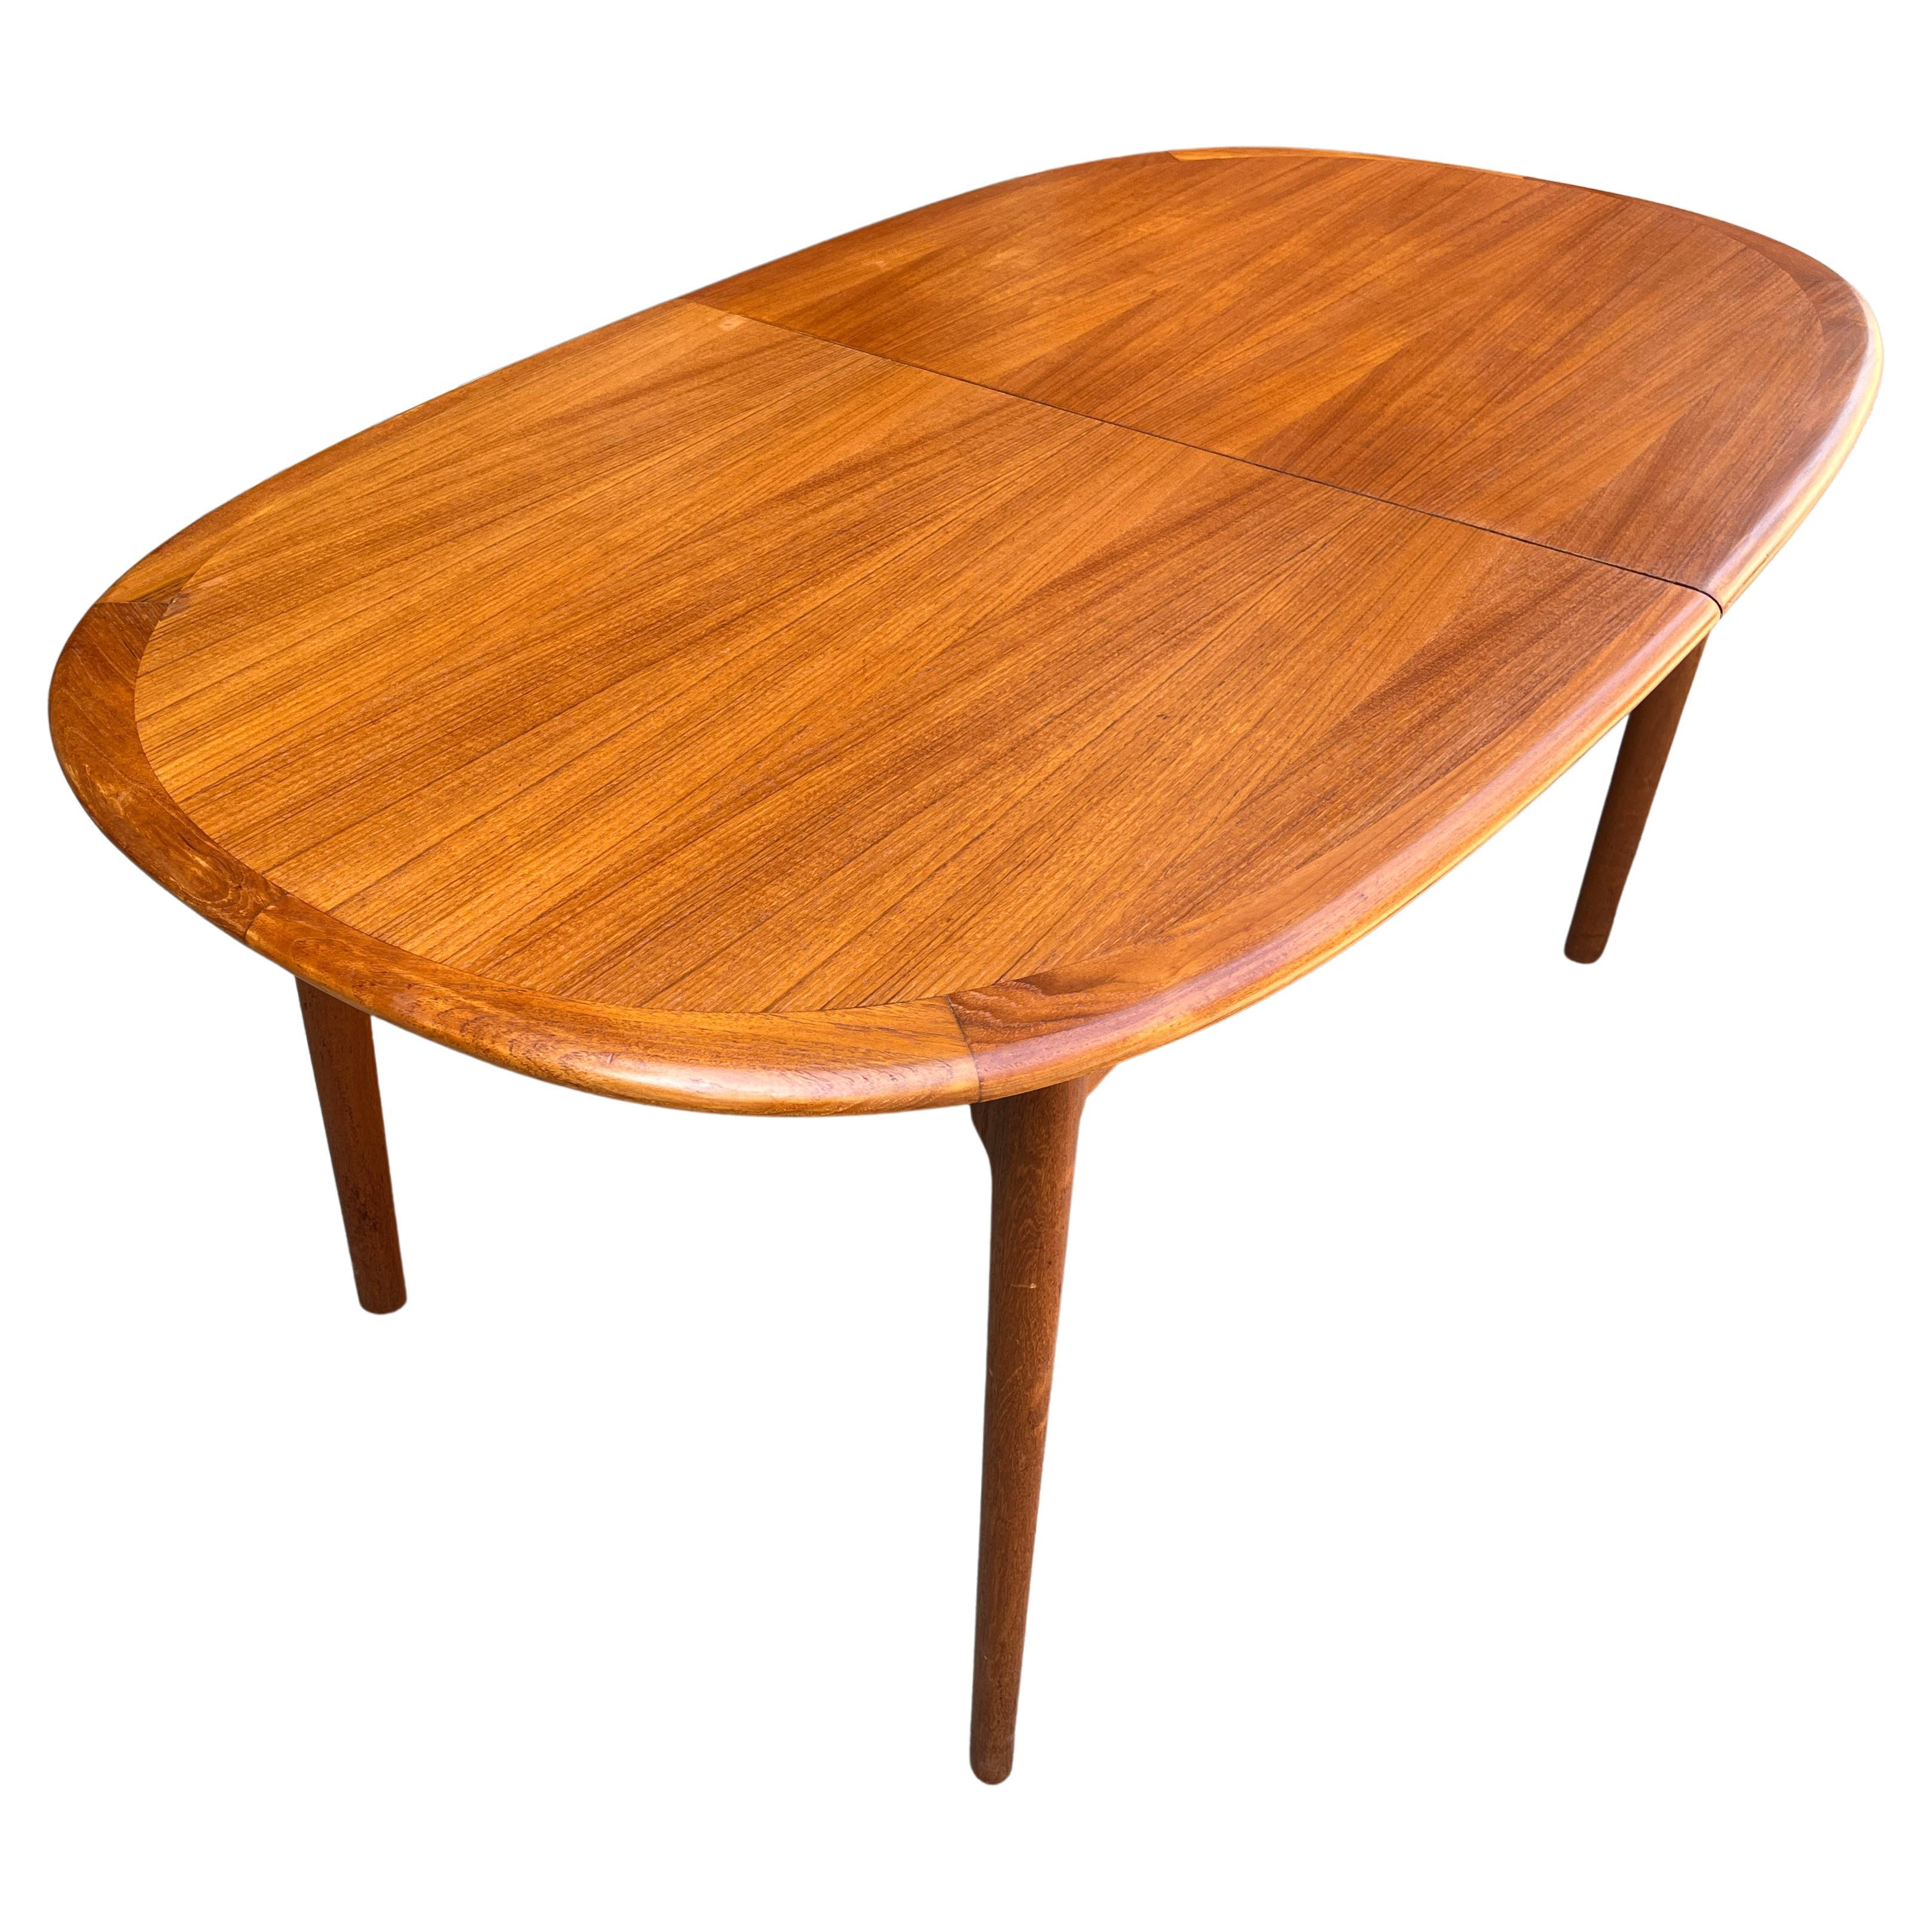 20th Century Midcentury Elliptical Oval Teak Expandable Dining Table  For Sale